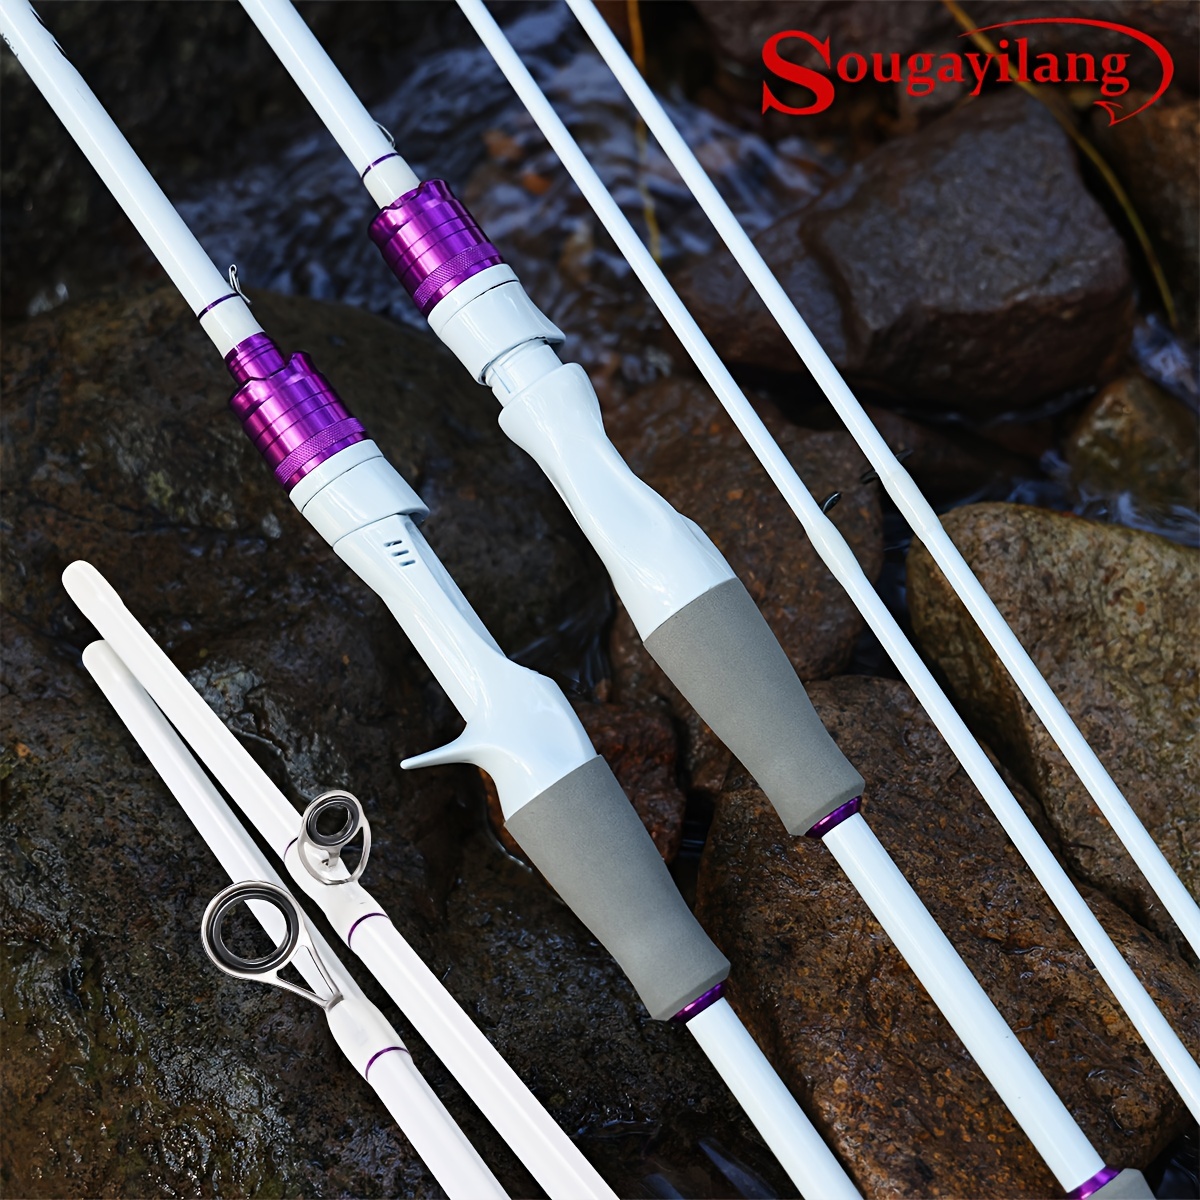 6.6ft 7ft Low Price Fly Fishing Rod Reel Combos Carbon Fiber 4 Section  Light Fishing Rod Beginner Fly Fishing Fishing Tackle - Fishing Rods -  AliExpress